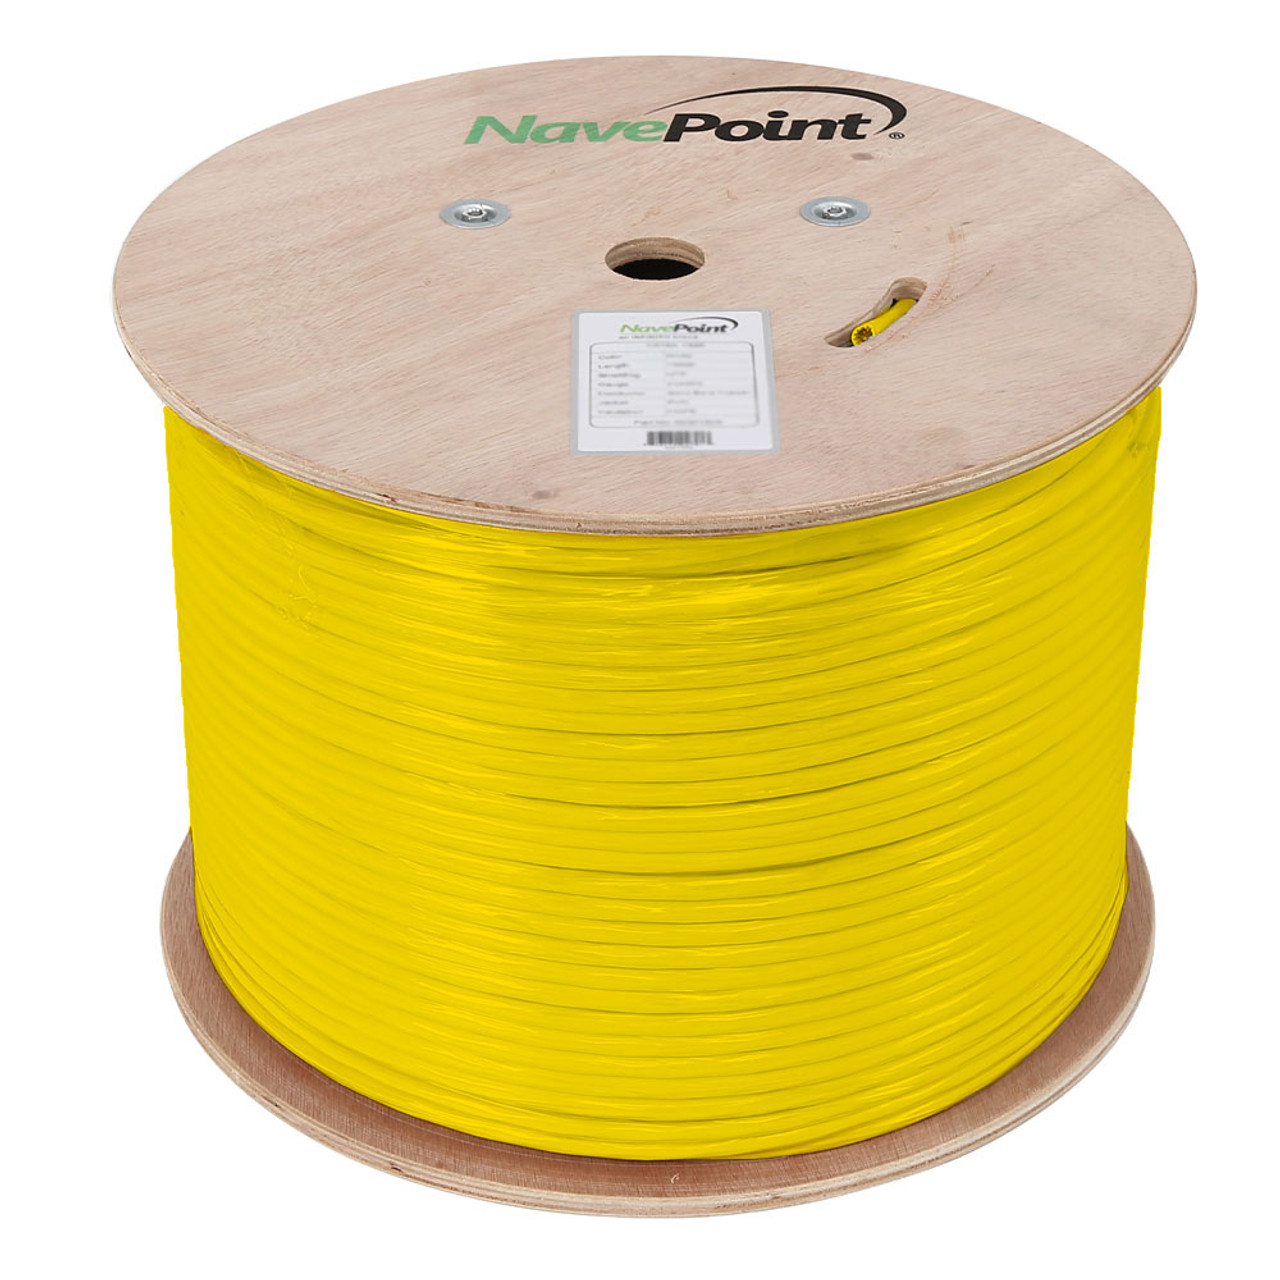 NavePoint CAT6A Bulk Network Cable Ethernet UTP CMR - 1000 Ft Yellow